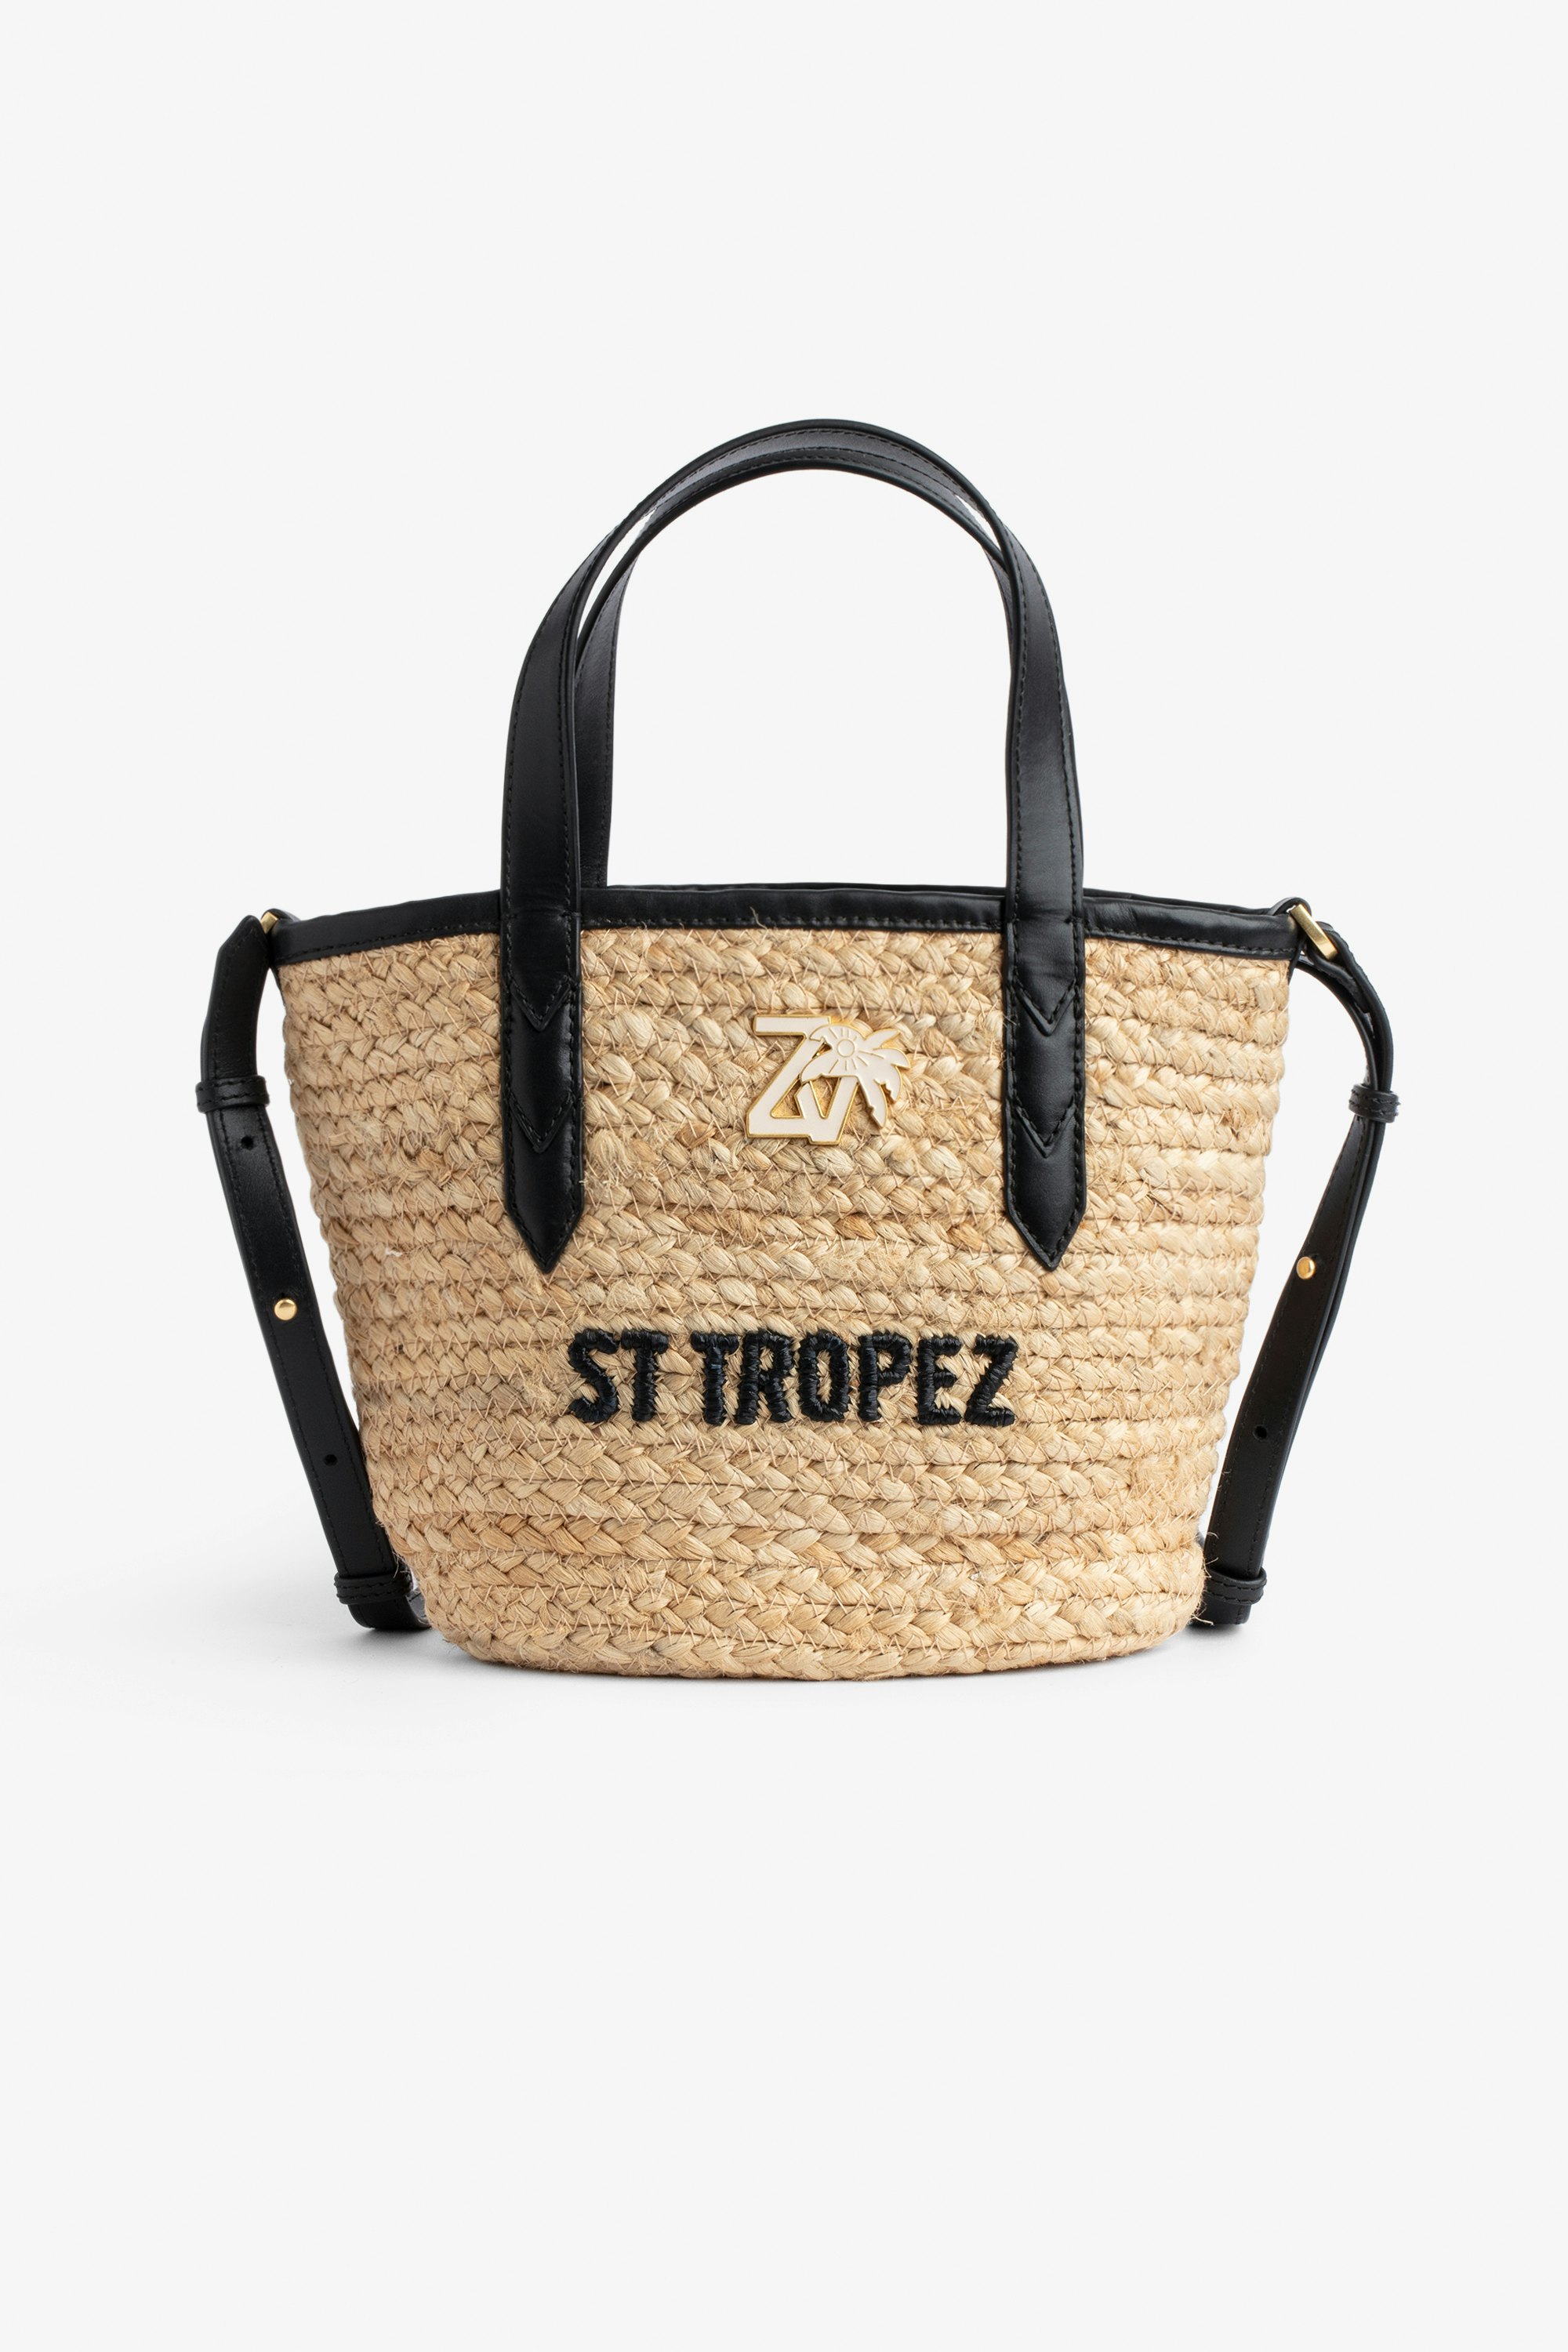 Le Baby Beach Bag - Women's straw bag with black leather shoulder strap, "St Tropez" embroidery and ZV charm